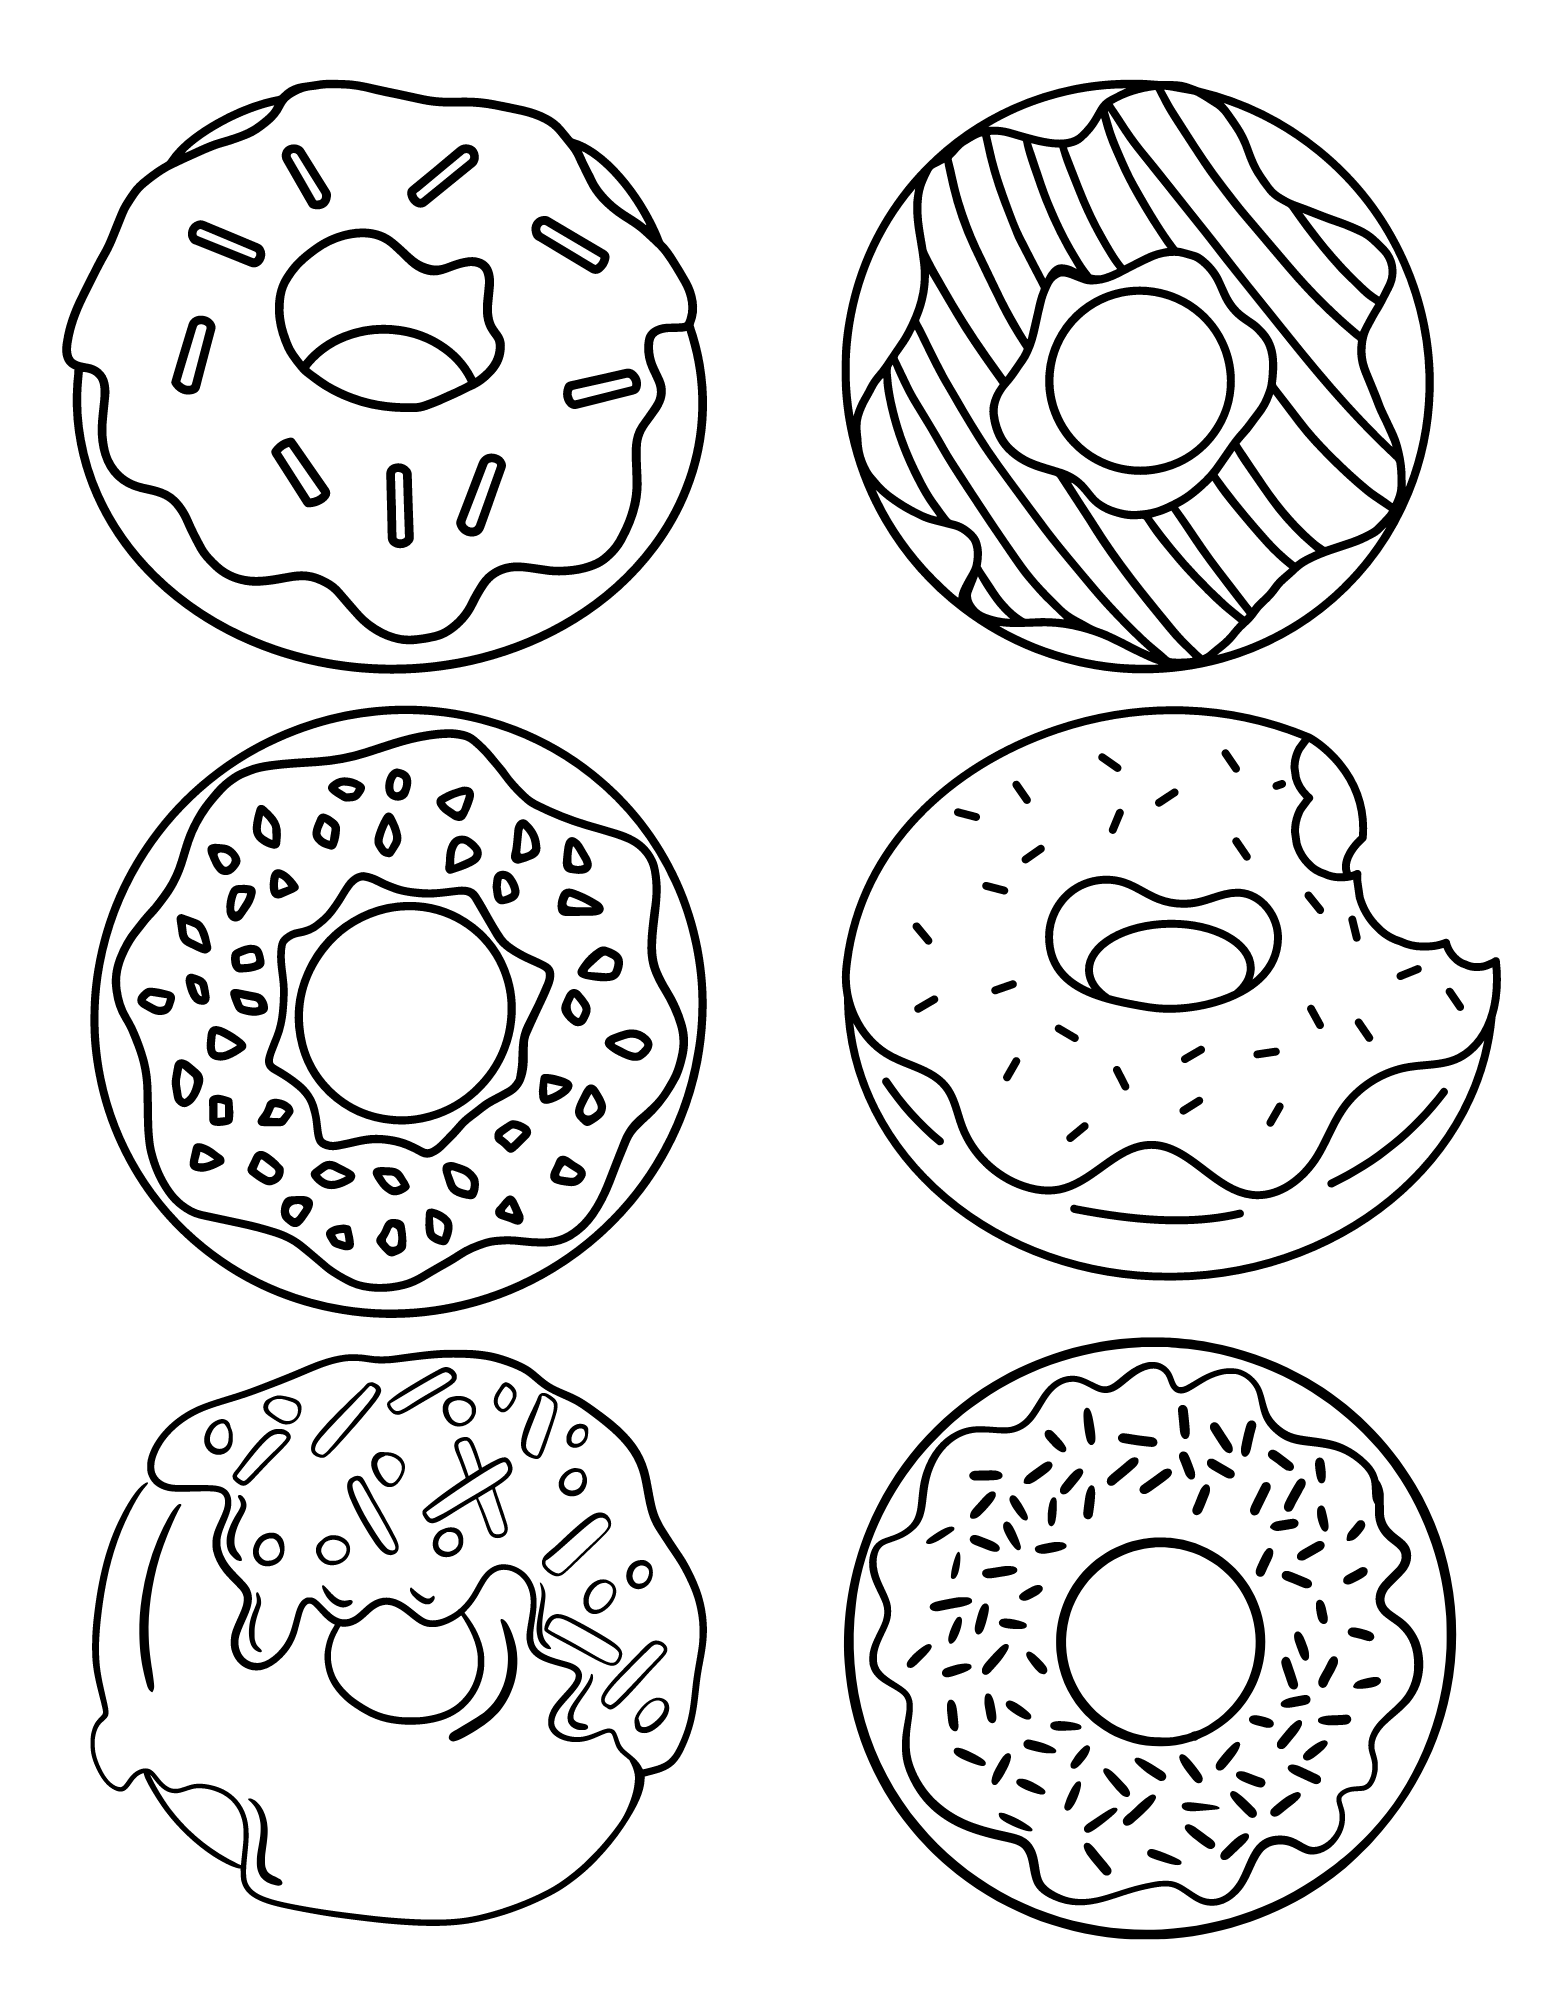 Cute donut coloring pages for kids and adults